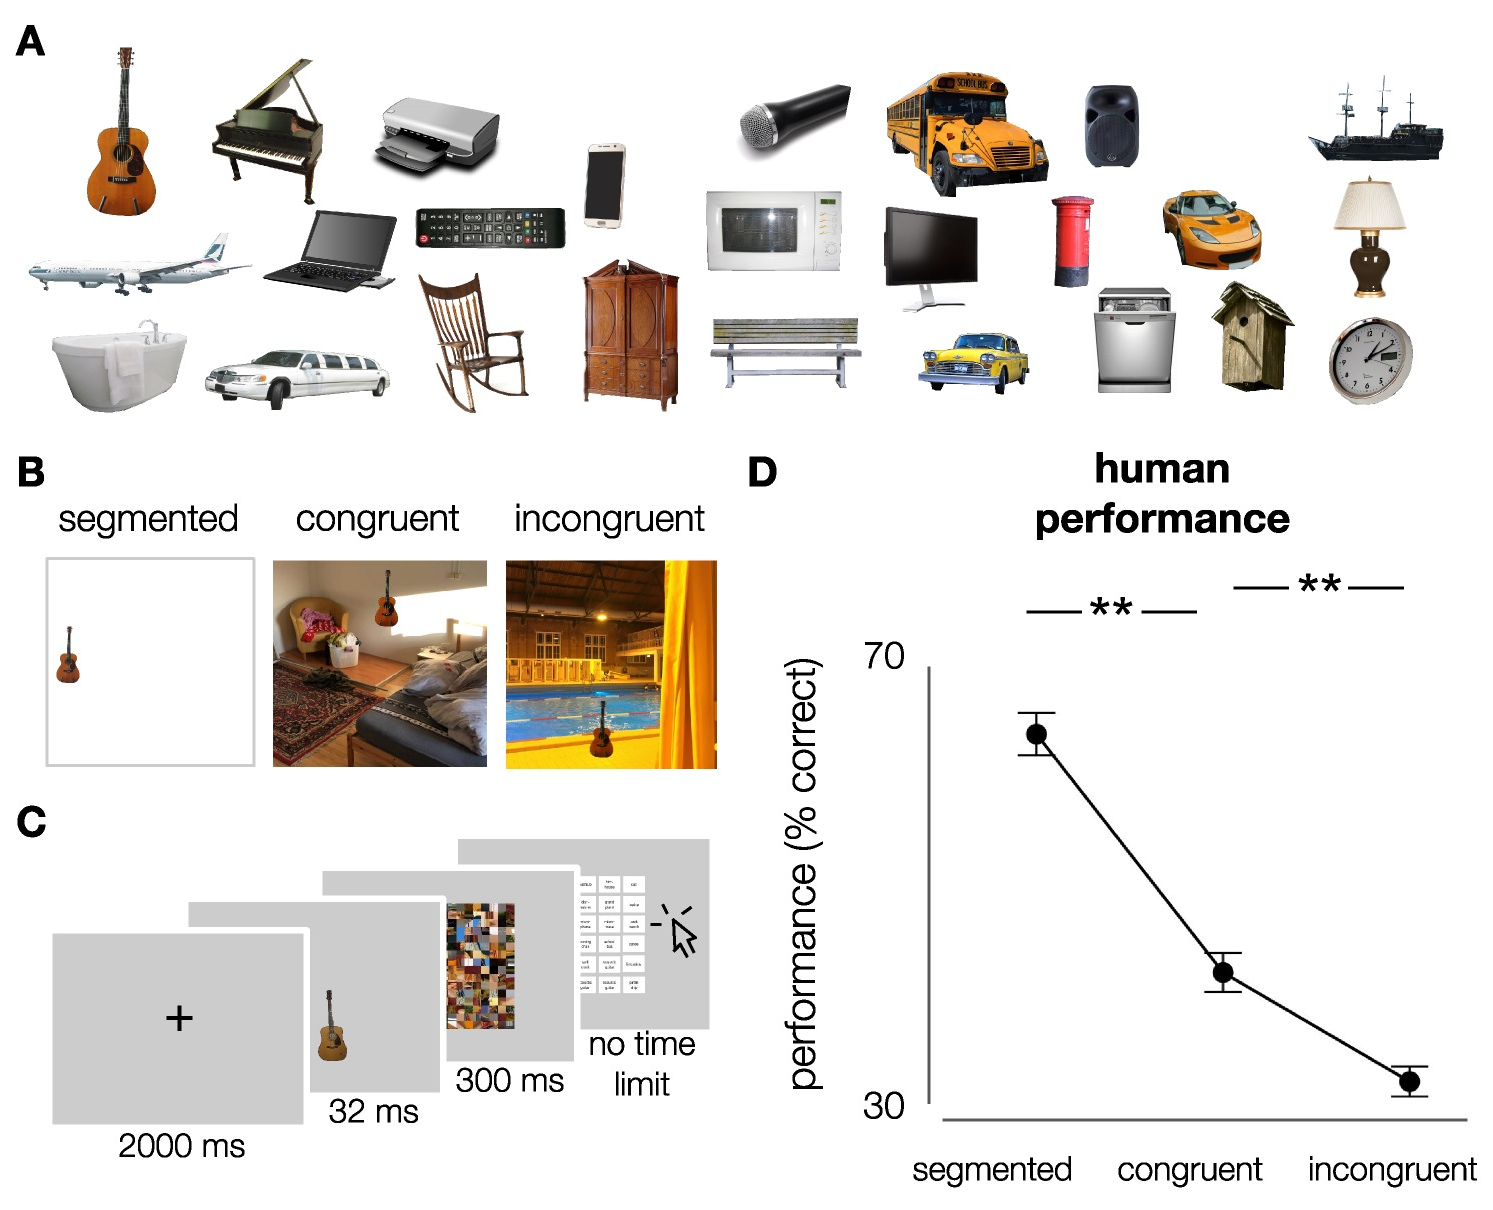 Stimuli and experimental design. A) Exemplars of the different object categories (cut-out objects from ImageNet validation set). 27 object categories were used in this experiment (subordinate level, based on ImageNet categories). In total, each category contained 10 exemplars. B) Stimuli were generated by placing the objects onto white, congruent and incongruent backgrounds (512*512 pixels, full-color). Backgrounds were sampled from the SUN2012 database (Xiao et al., 2010). For human participants, objects were downsized and placed in one of nine possible locations (3*3 grid). For DCNNs, objects were bigger and placed centrally. C) Participants performed on an object recognition task. At the beginning of each trial, a fixation-cross was presented in the center of the screen for 2000 ms, followed by an image. Images were presented in randomized sequence, for a duration of 32 ms, followed by a mask, presented for 300 ms. After the mask, participants had to indicate which object they saw, by clicking on one of 27 options on screen using the mouse. After 81 (\(1/3\)) and 162 (\(2/3\)) trials, there was a short break. D) Human performance (% correct) on the object recognition task. Participants performed best for segmented objects, followed by congruent and incongruent respectively. Error bars represent bootstrap 95% confidence intervals.